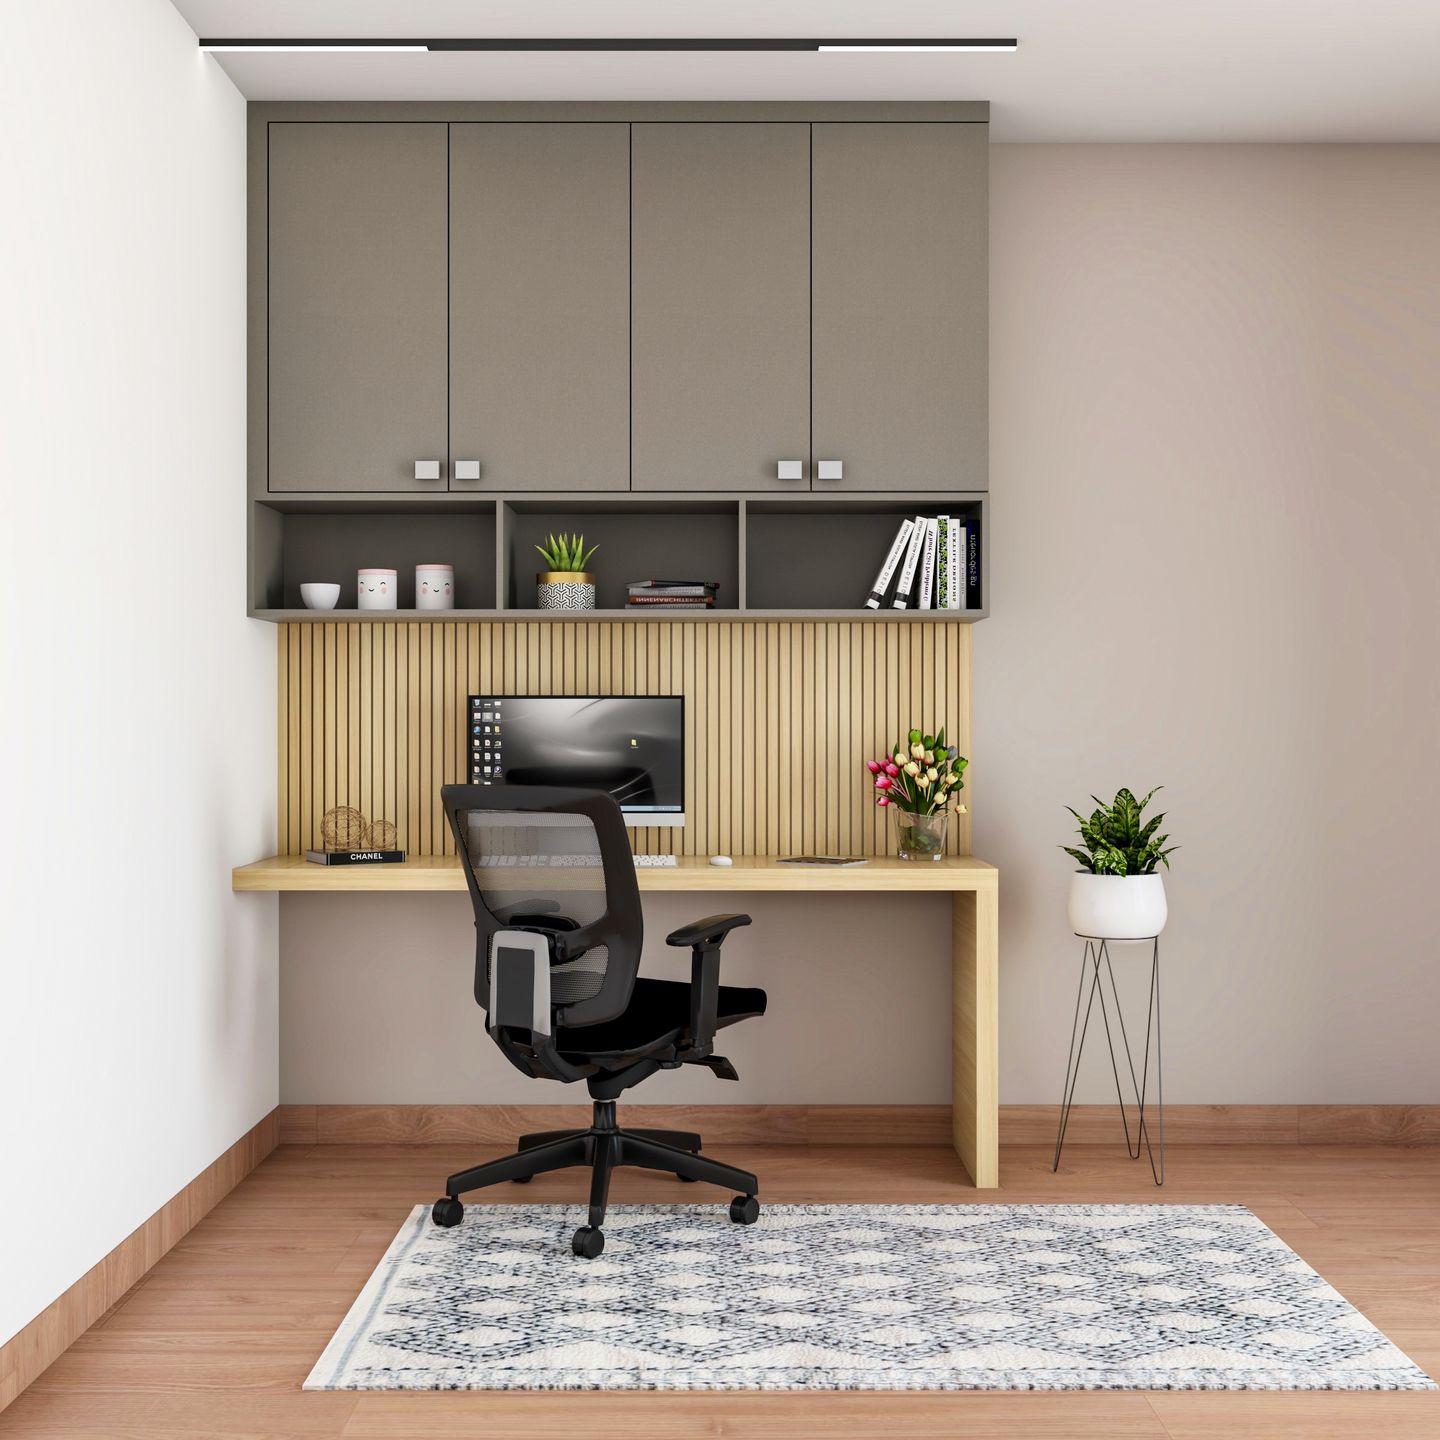 Convenient Modern Style Compact Sized Home Office Design | Livspace